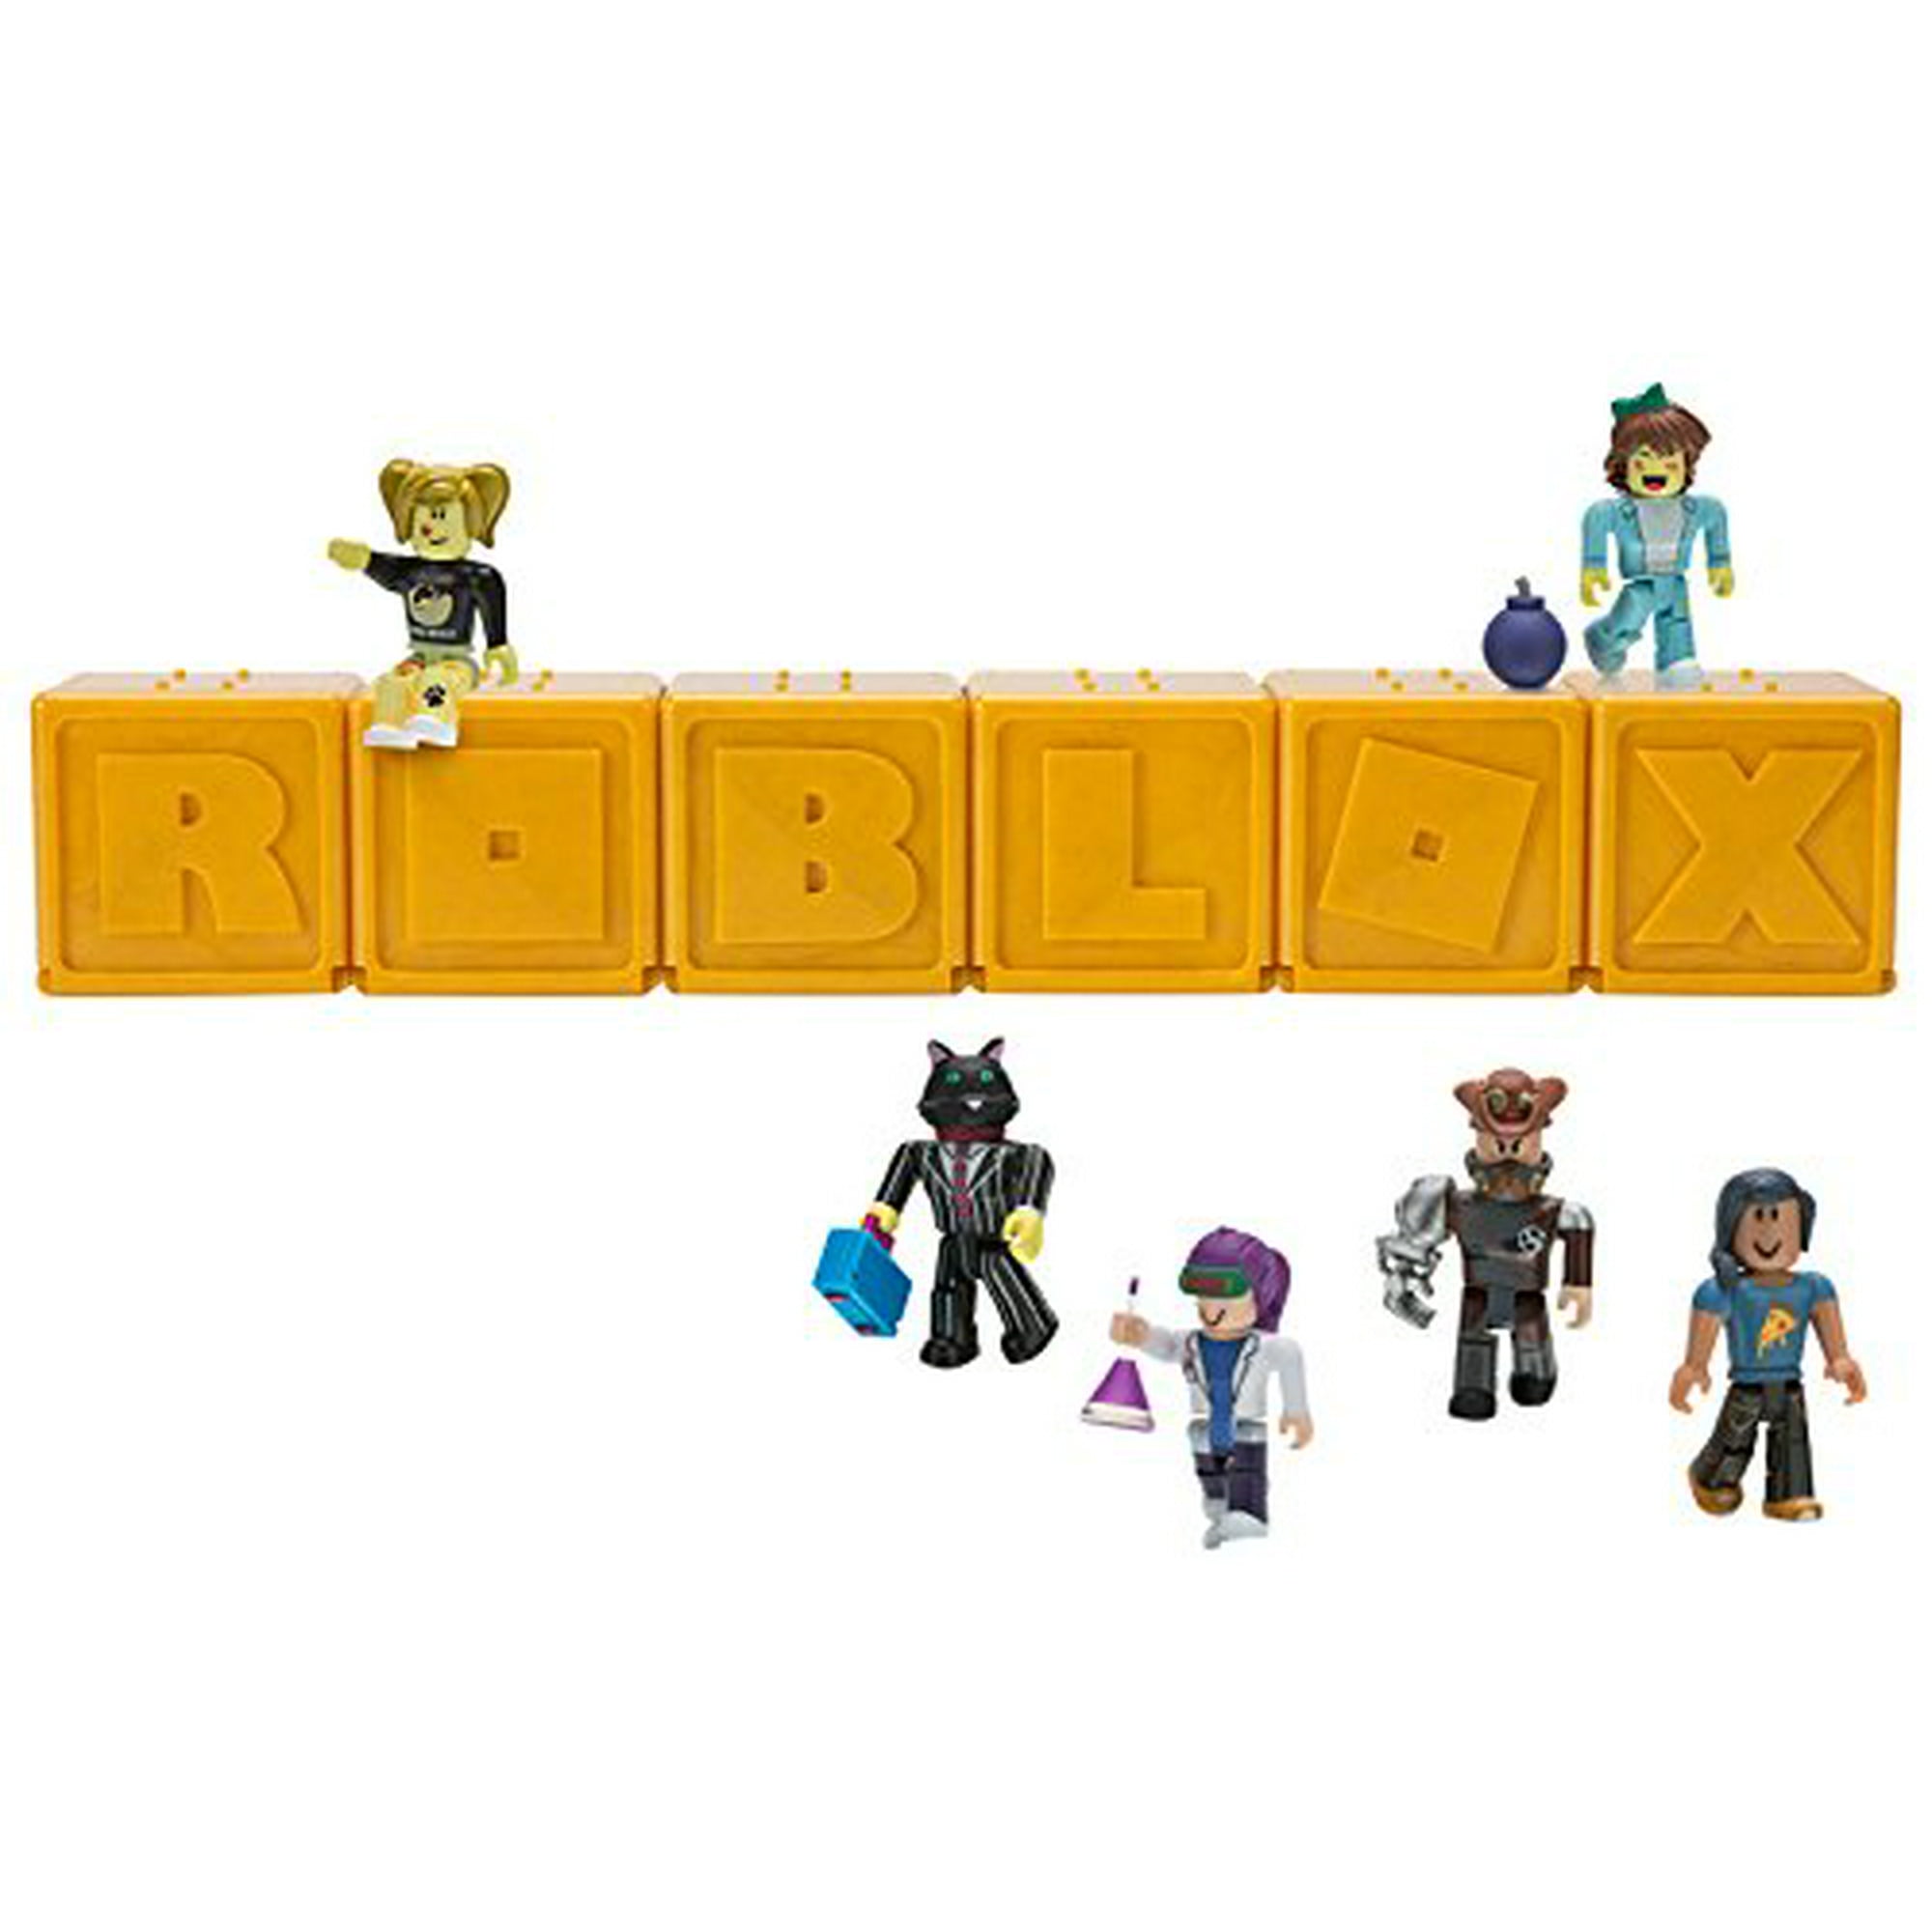 Roblox Celebrity Mystery Figure Series 1 Polybag Of 6 Action Figures Walmart Canada - buy roblox mystery figure series 3 polybag of 6 action